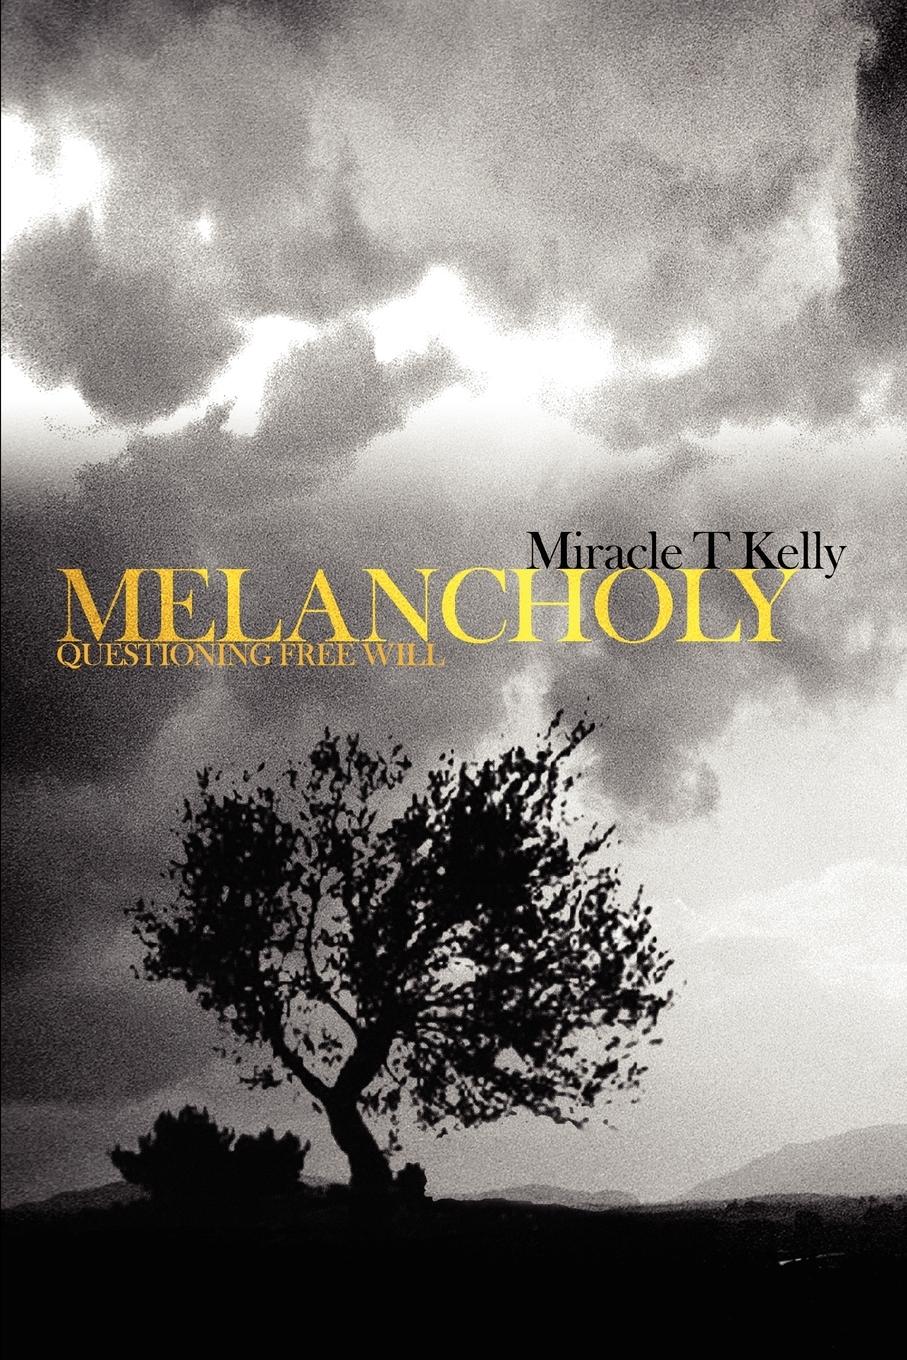 Melancholy: Questioning Free Will - Kelly, Miracle T